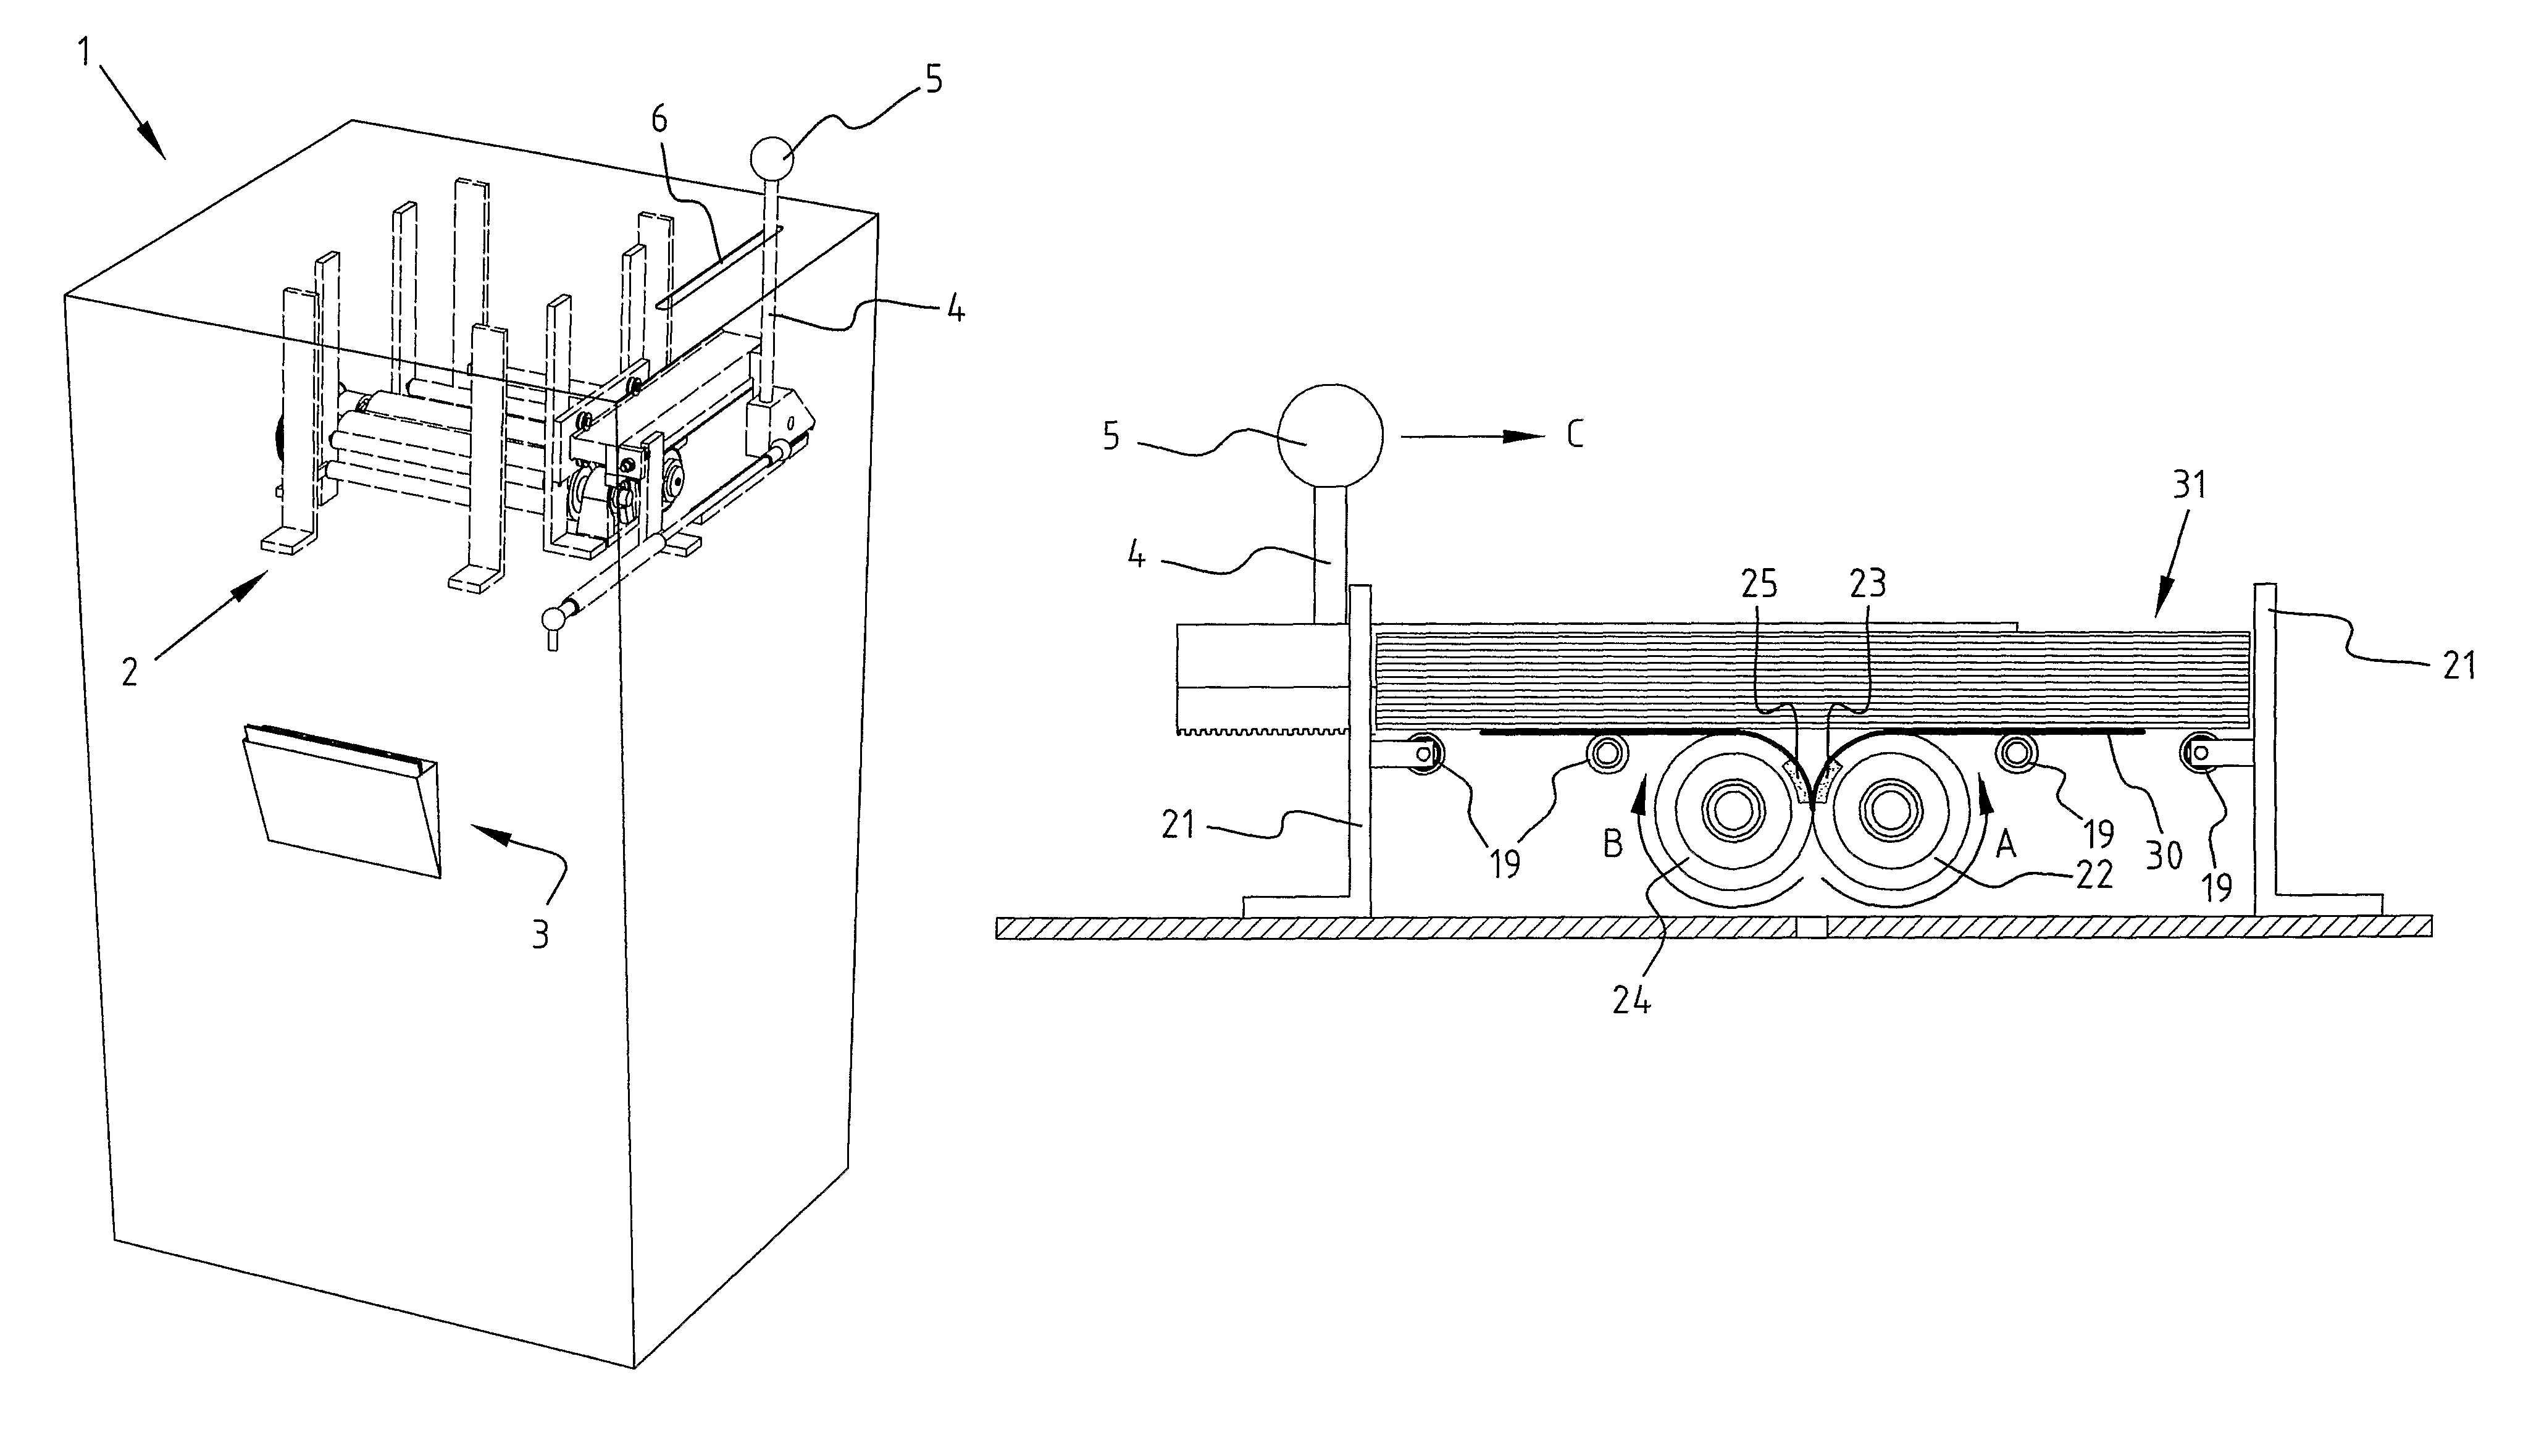 Apparatus and method for dispensing and folding of sheets from a stack